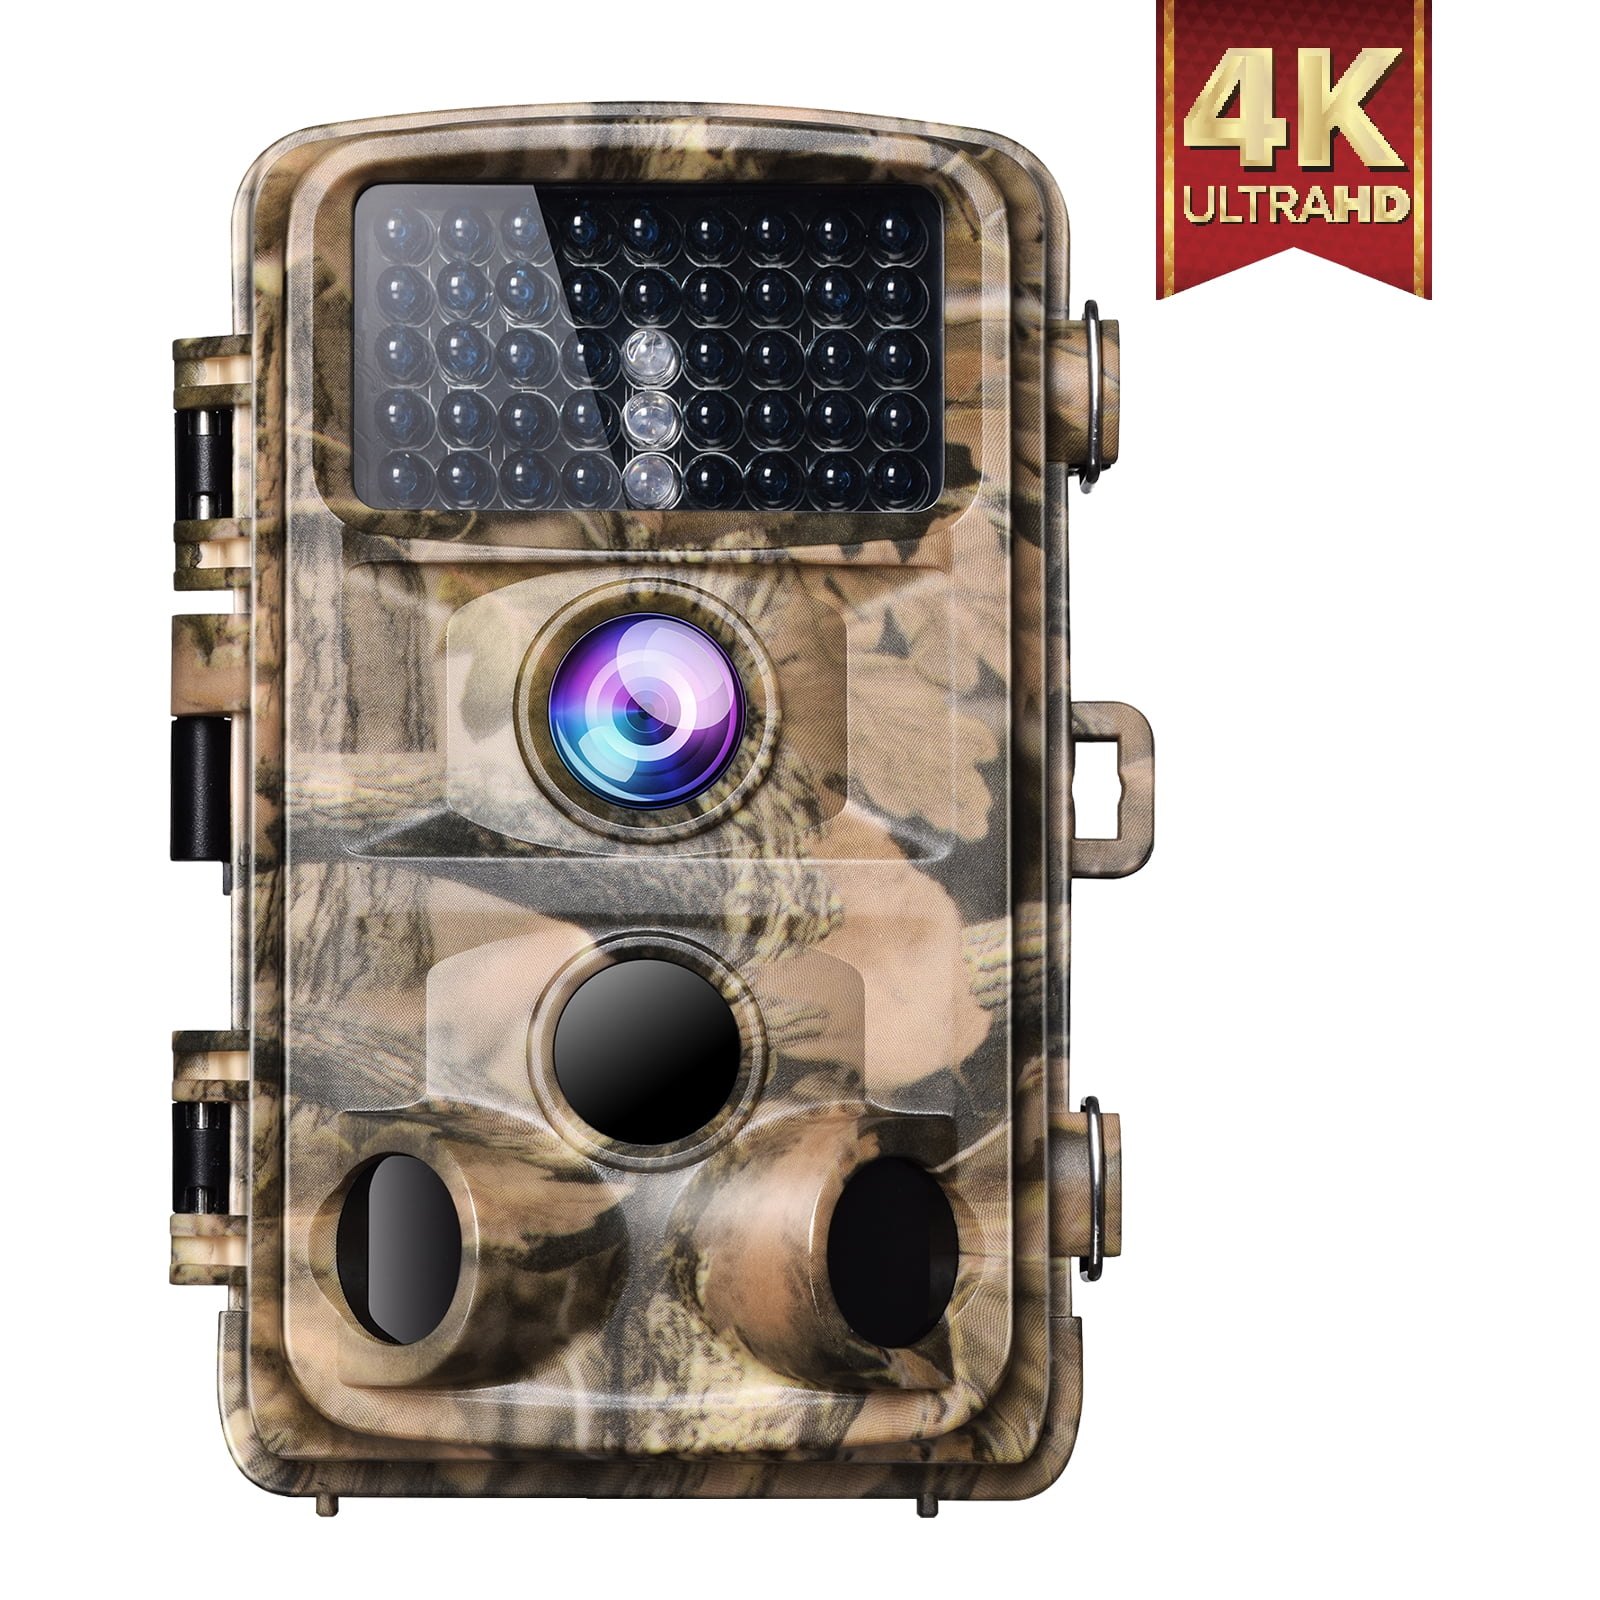 Campark Trail Game Camera 12MP FHD 1080P Waterproof IR Hunting Scouting Wildlife 